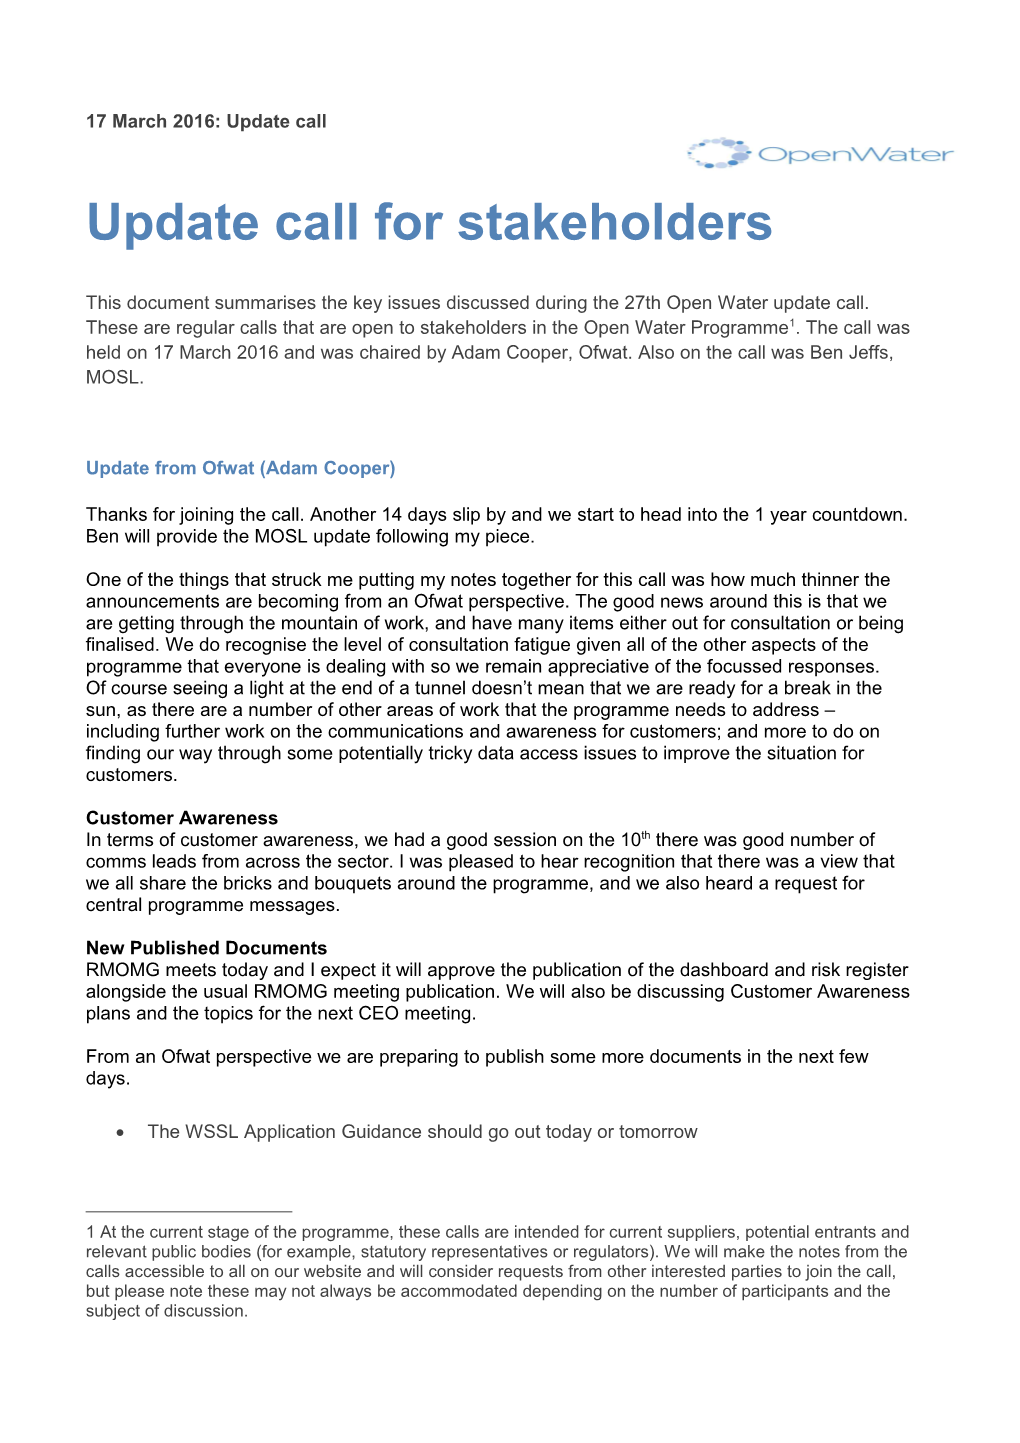 Update Call for Stakeholders